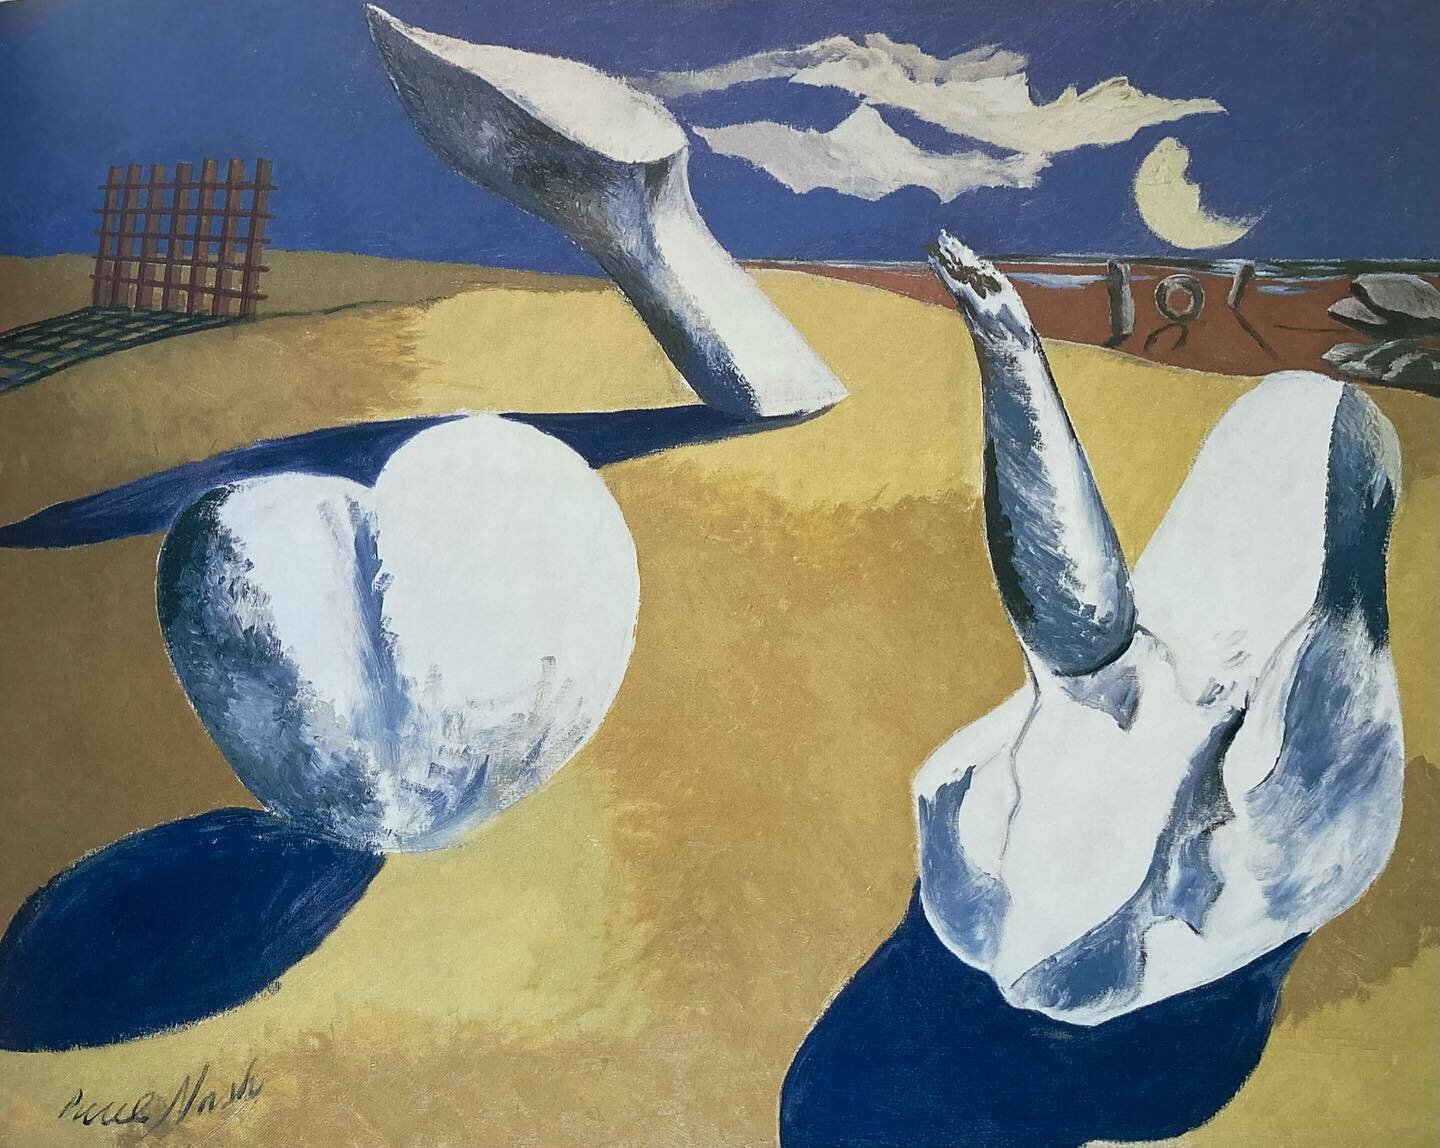 When it comes to moonscapes Paul Nash is one of the greats!